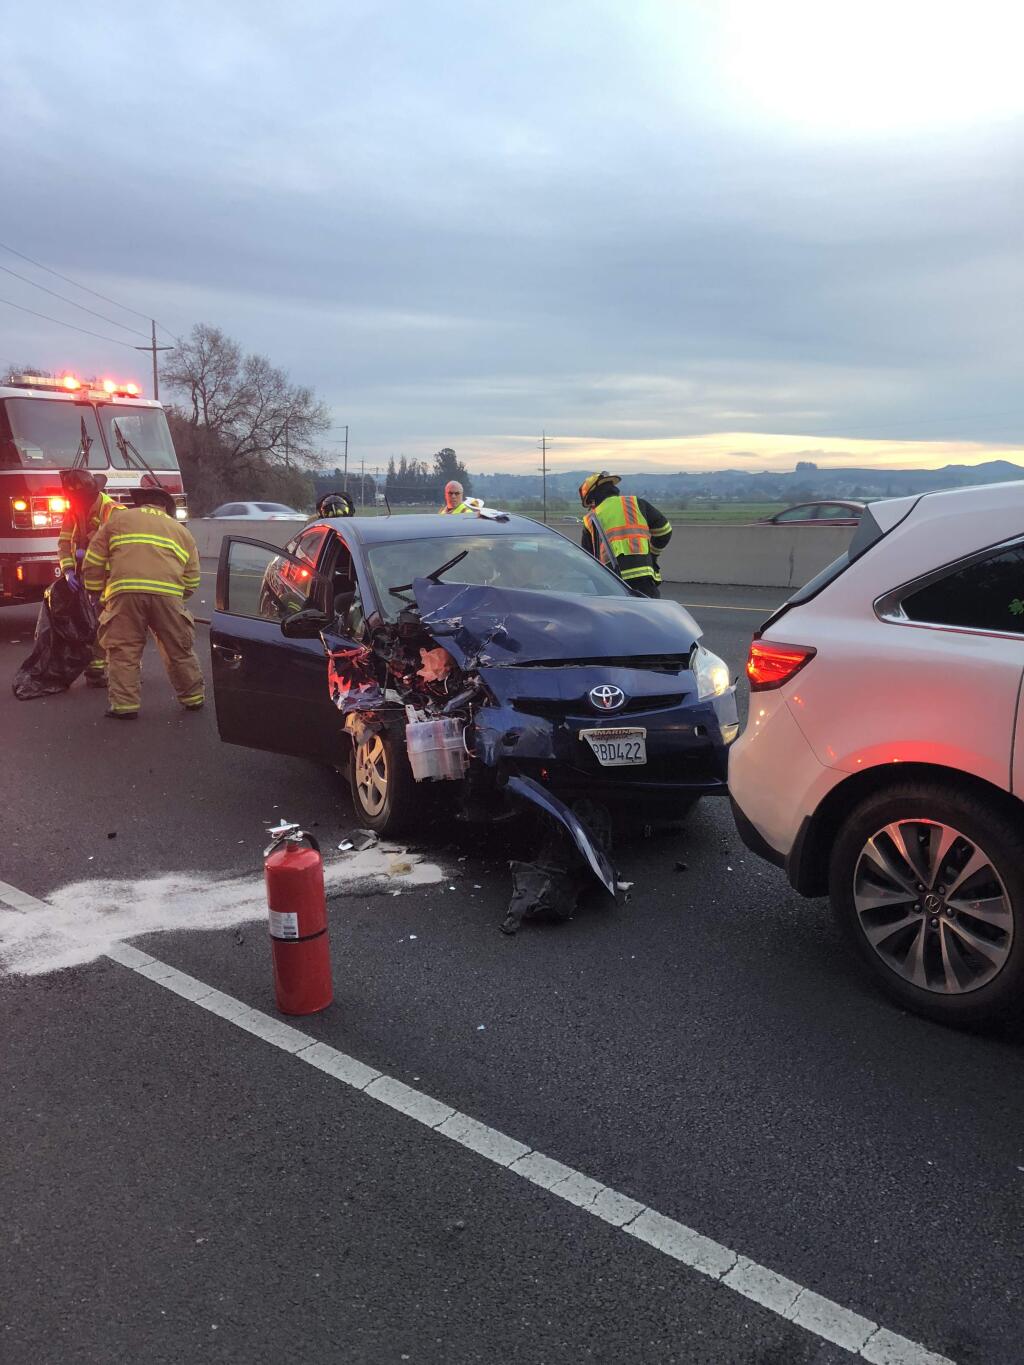 Emergency crews at the scene of a four-vehicle collision on Highway 101 north of Petaluma on Monday, Jan. 29, 2018. (COURTESY OF RANCHO ADOBE FIRE)